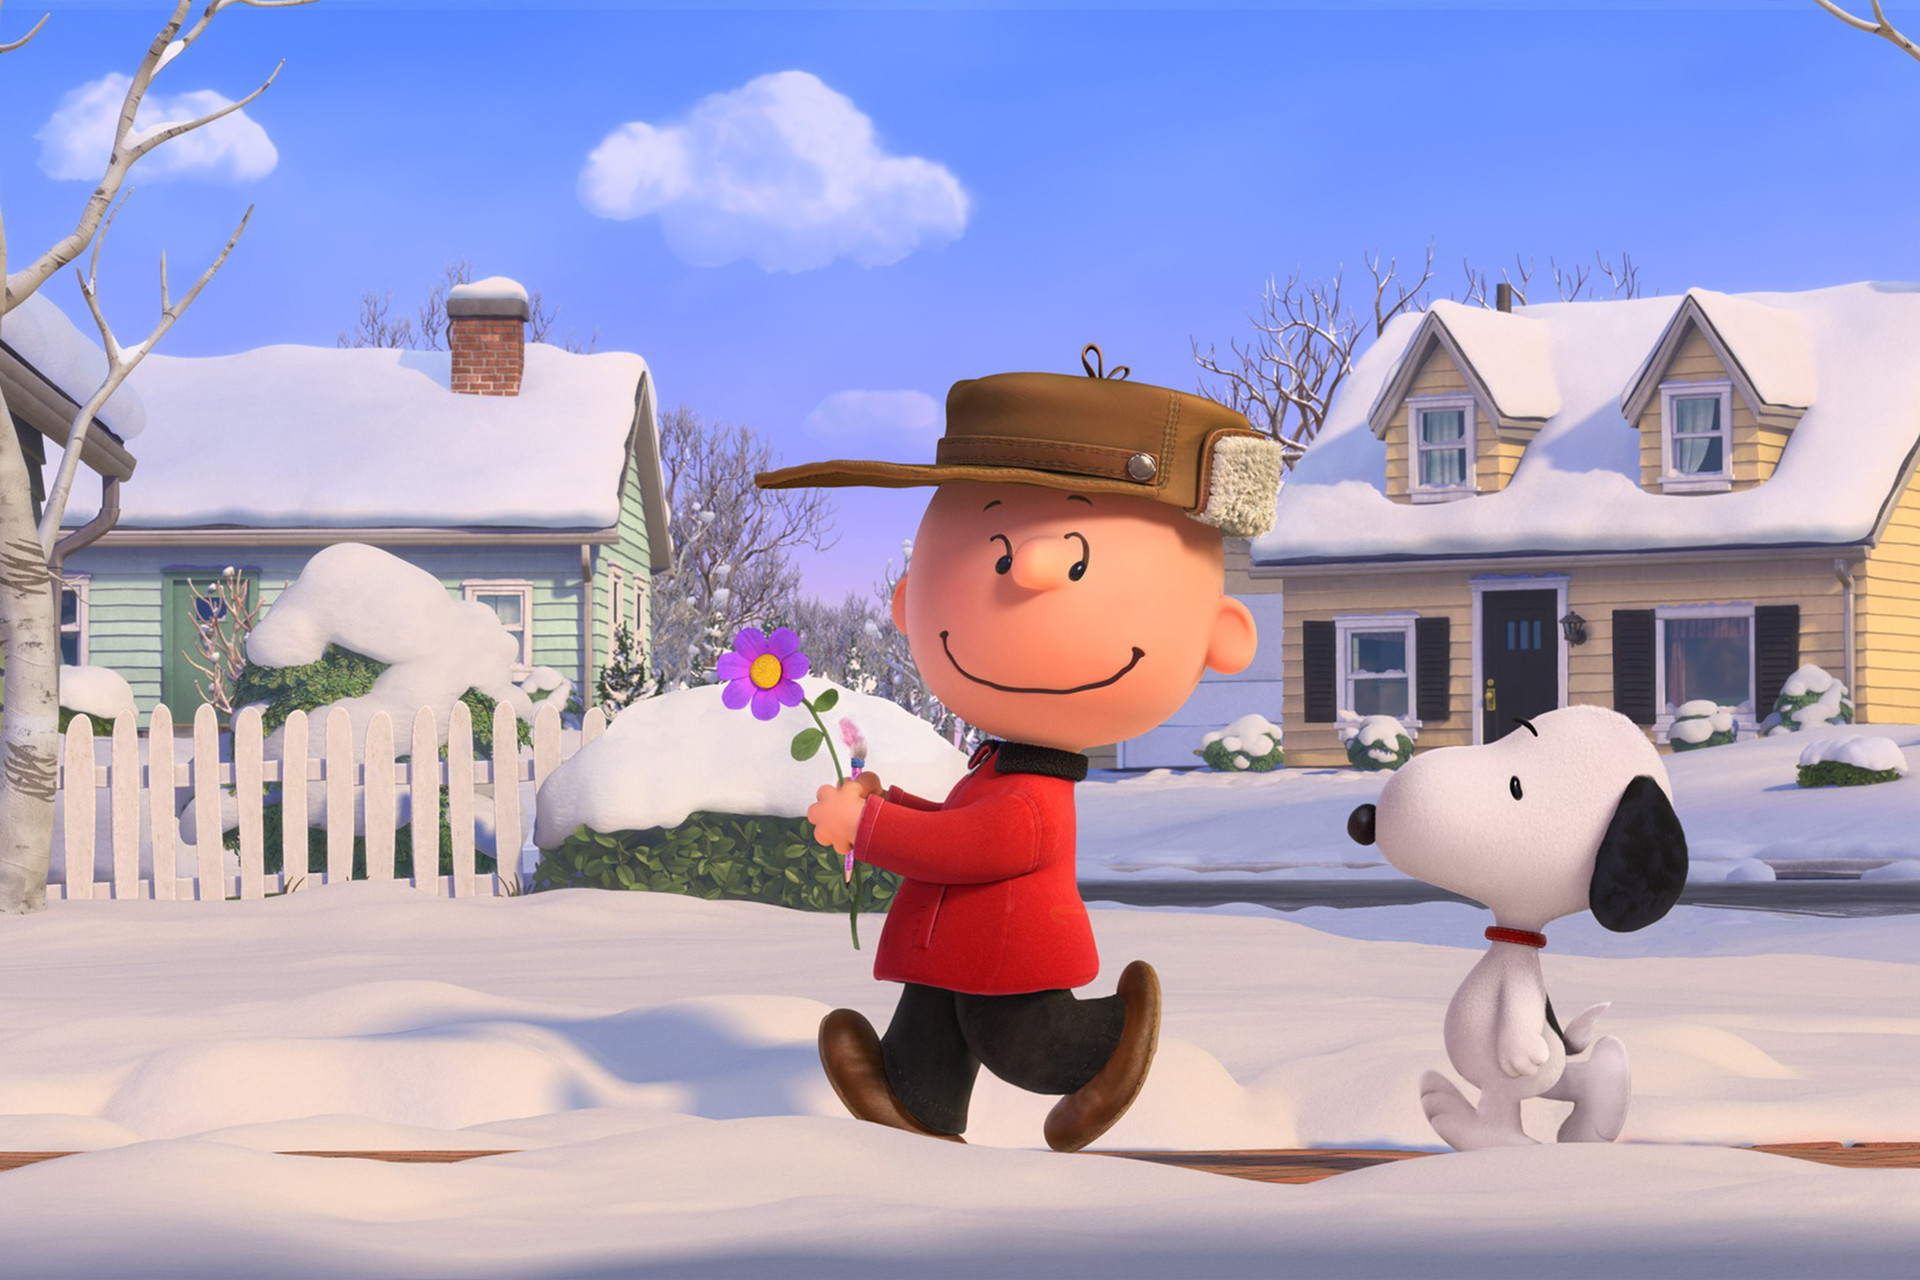 1920x1280 Snoopy and Charlie Brown in winter – wallpaper